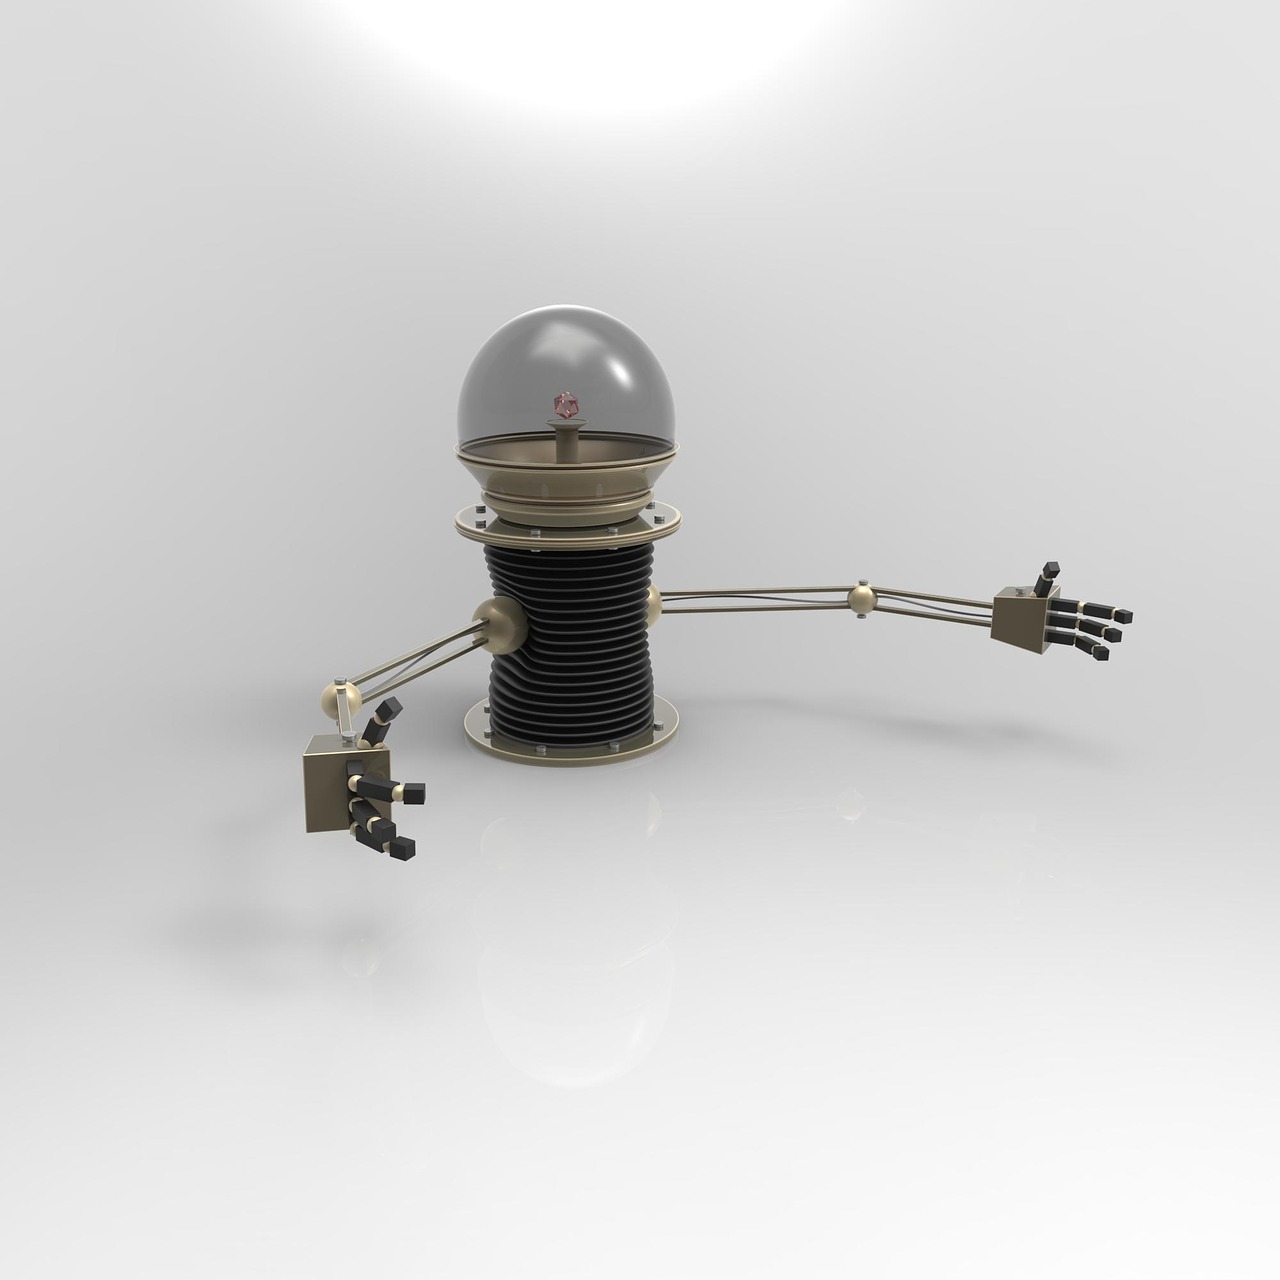 Robot with long arms and light bulb head